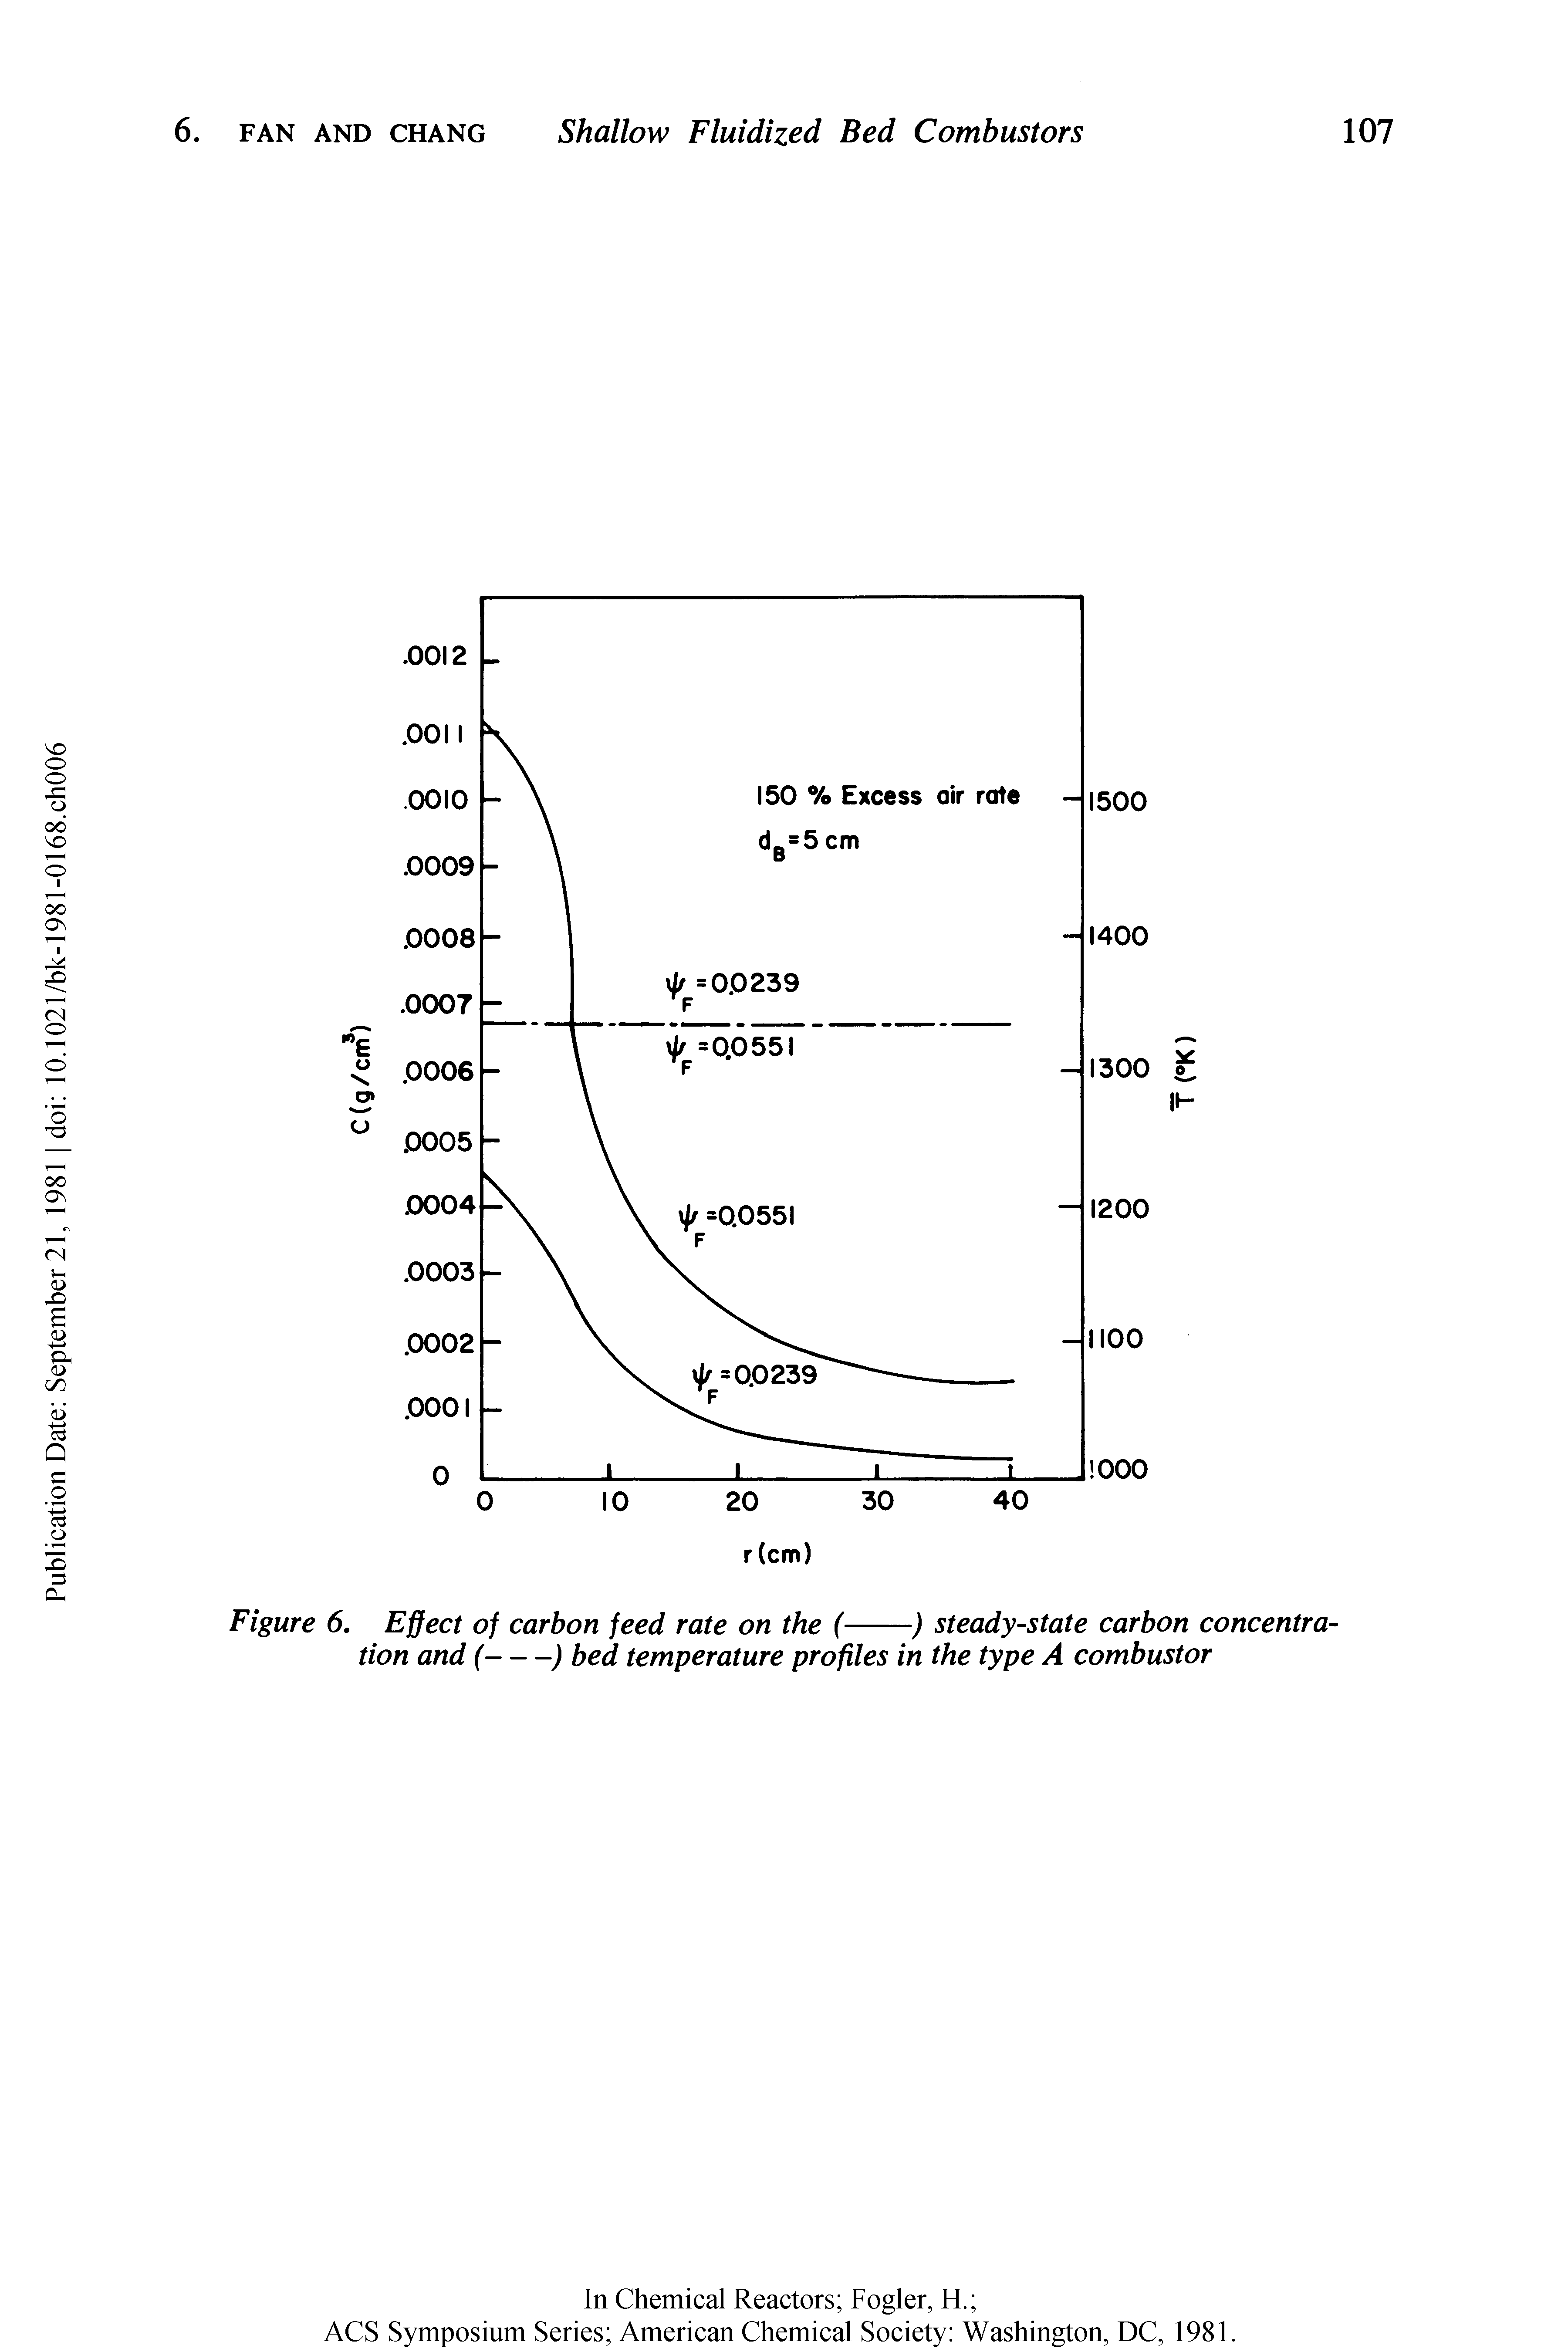 Figure 6. Effect of carbon feed rate on the (---------) steady-state carbon concentration and (---------------) bed temperature profiles in the type A combustor...